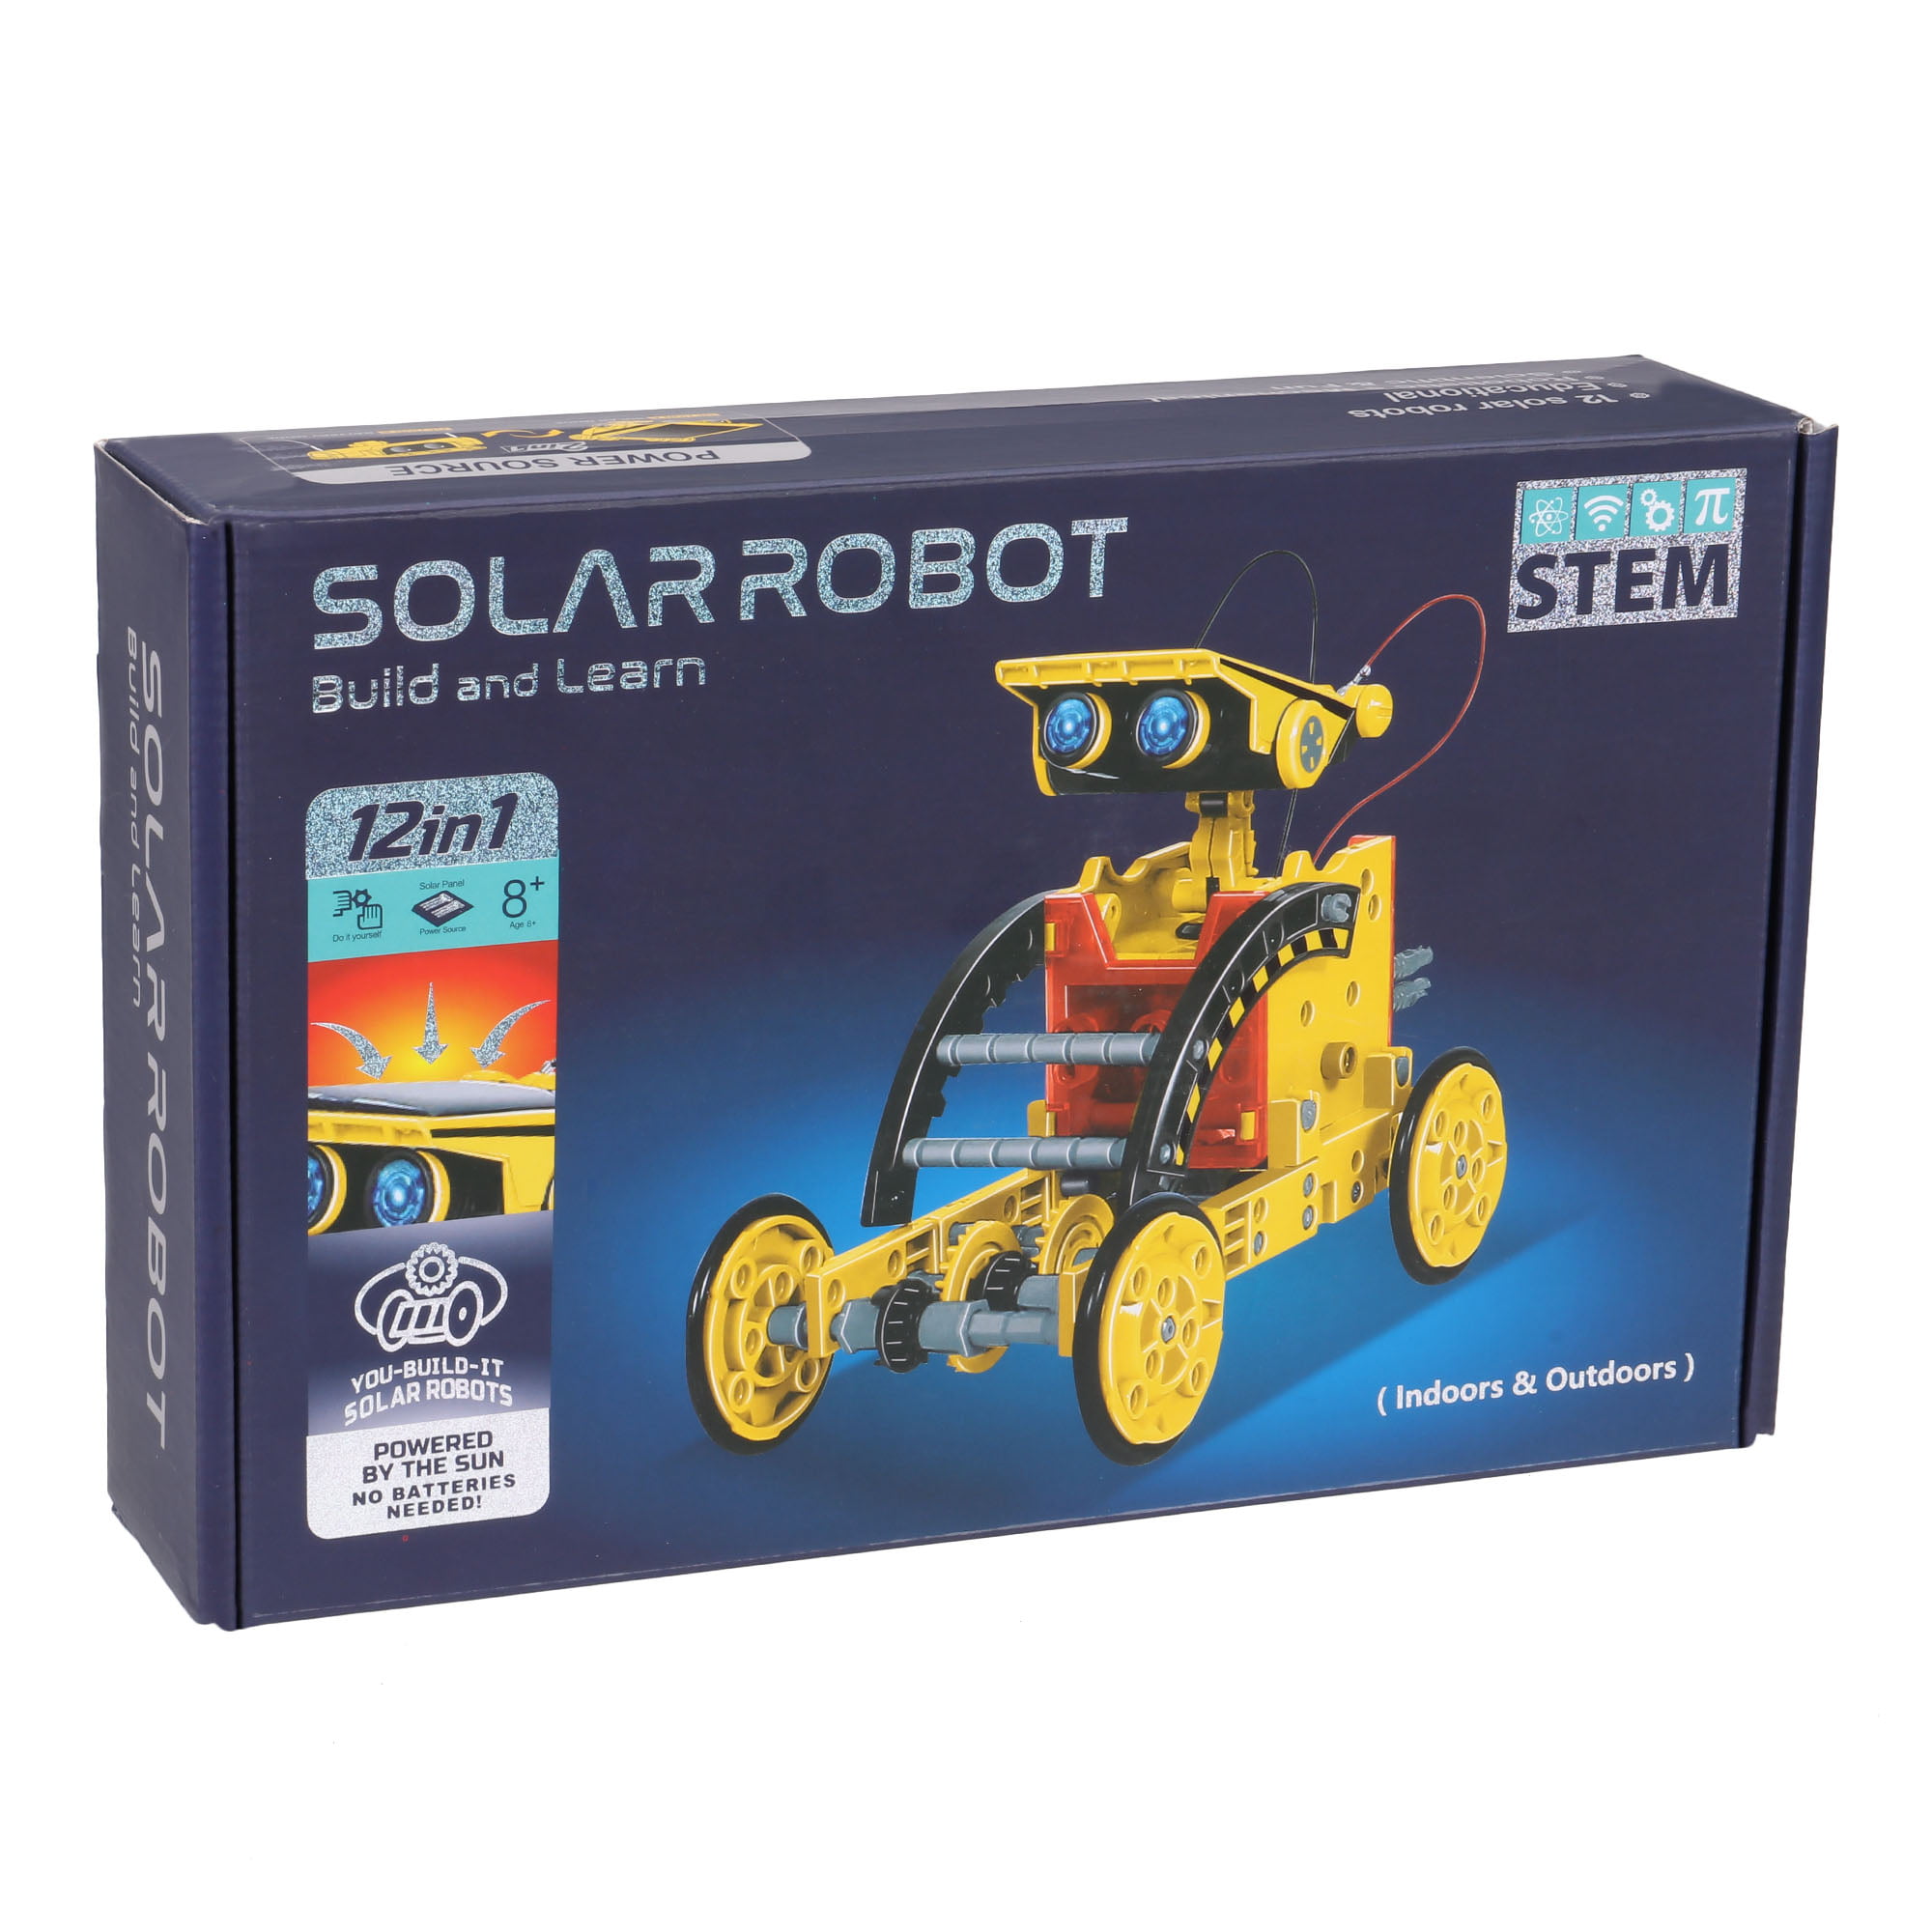  Fufafayo Robot Kits, Solar R-Obot K-It for Kids, 6-in-1  Educational Stem Science Toy, Solar Power Building Kit DIY Assembly Battery  Operated Robotic Set for Kids, Christmas- : Toys & Games